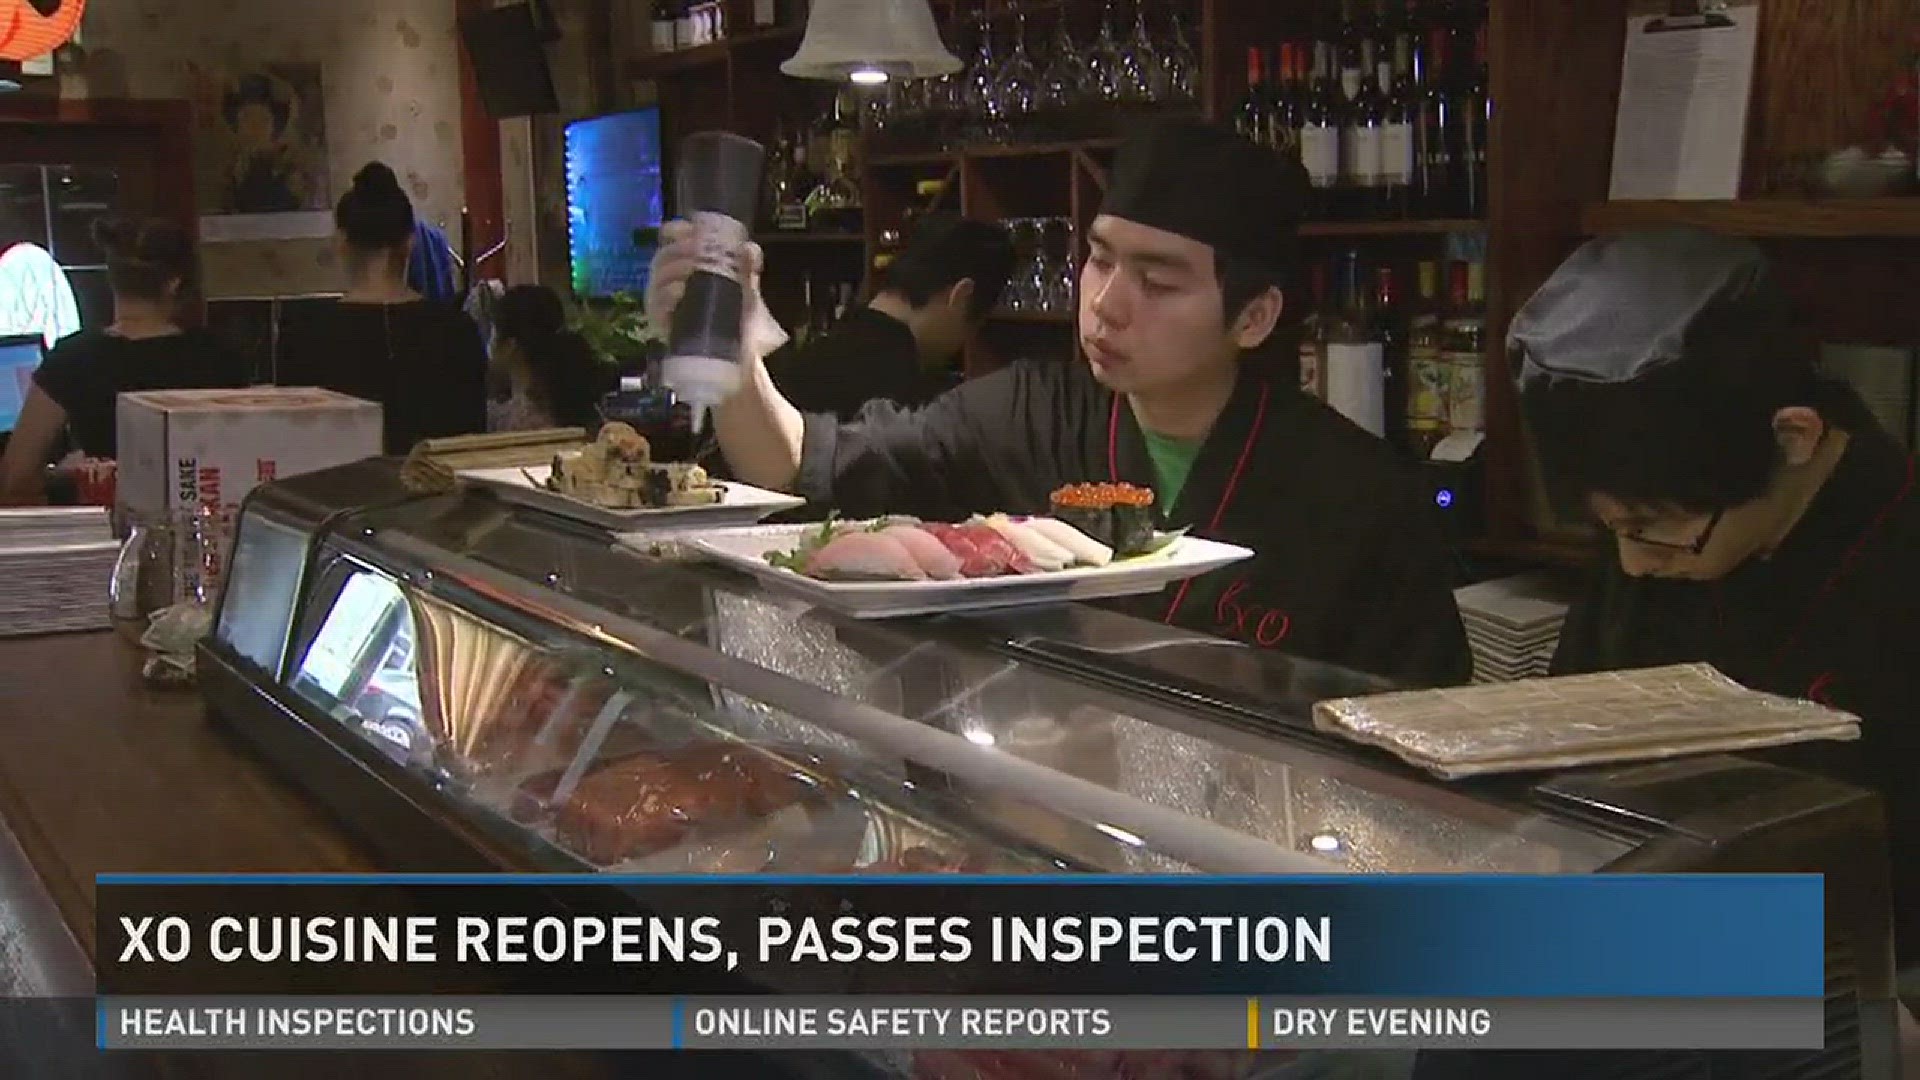 The recent developments at the popular Asian restaurant... are sparking new interest in the food inspection process.